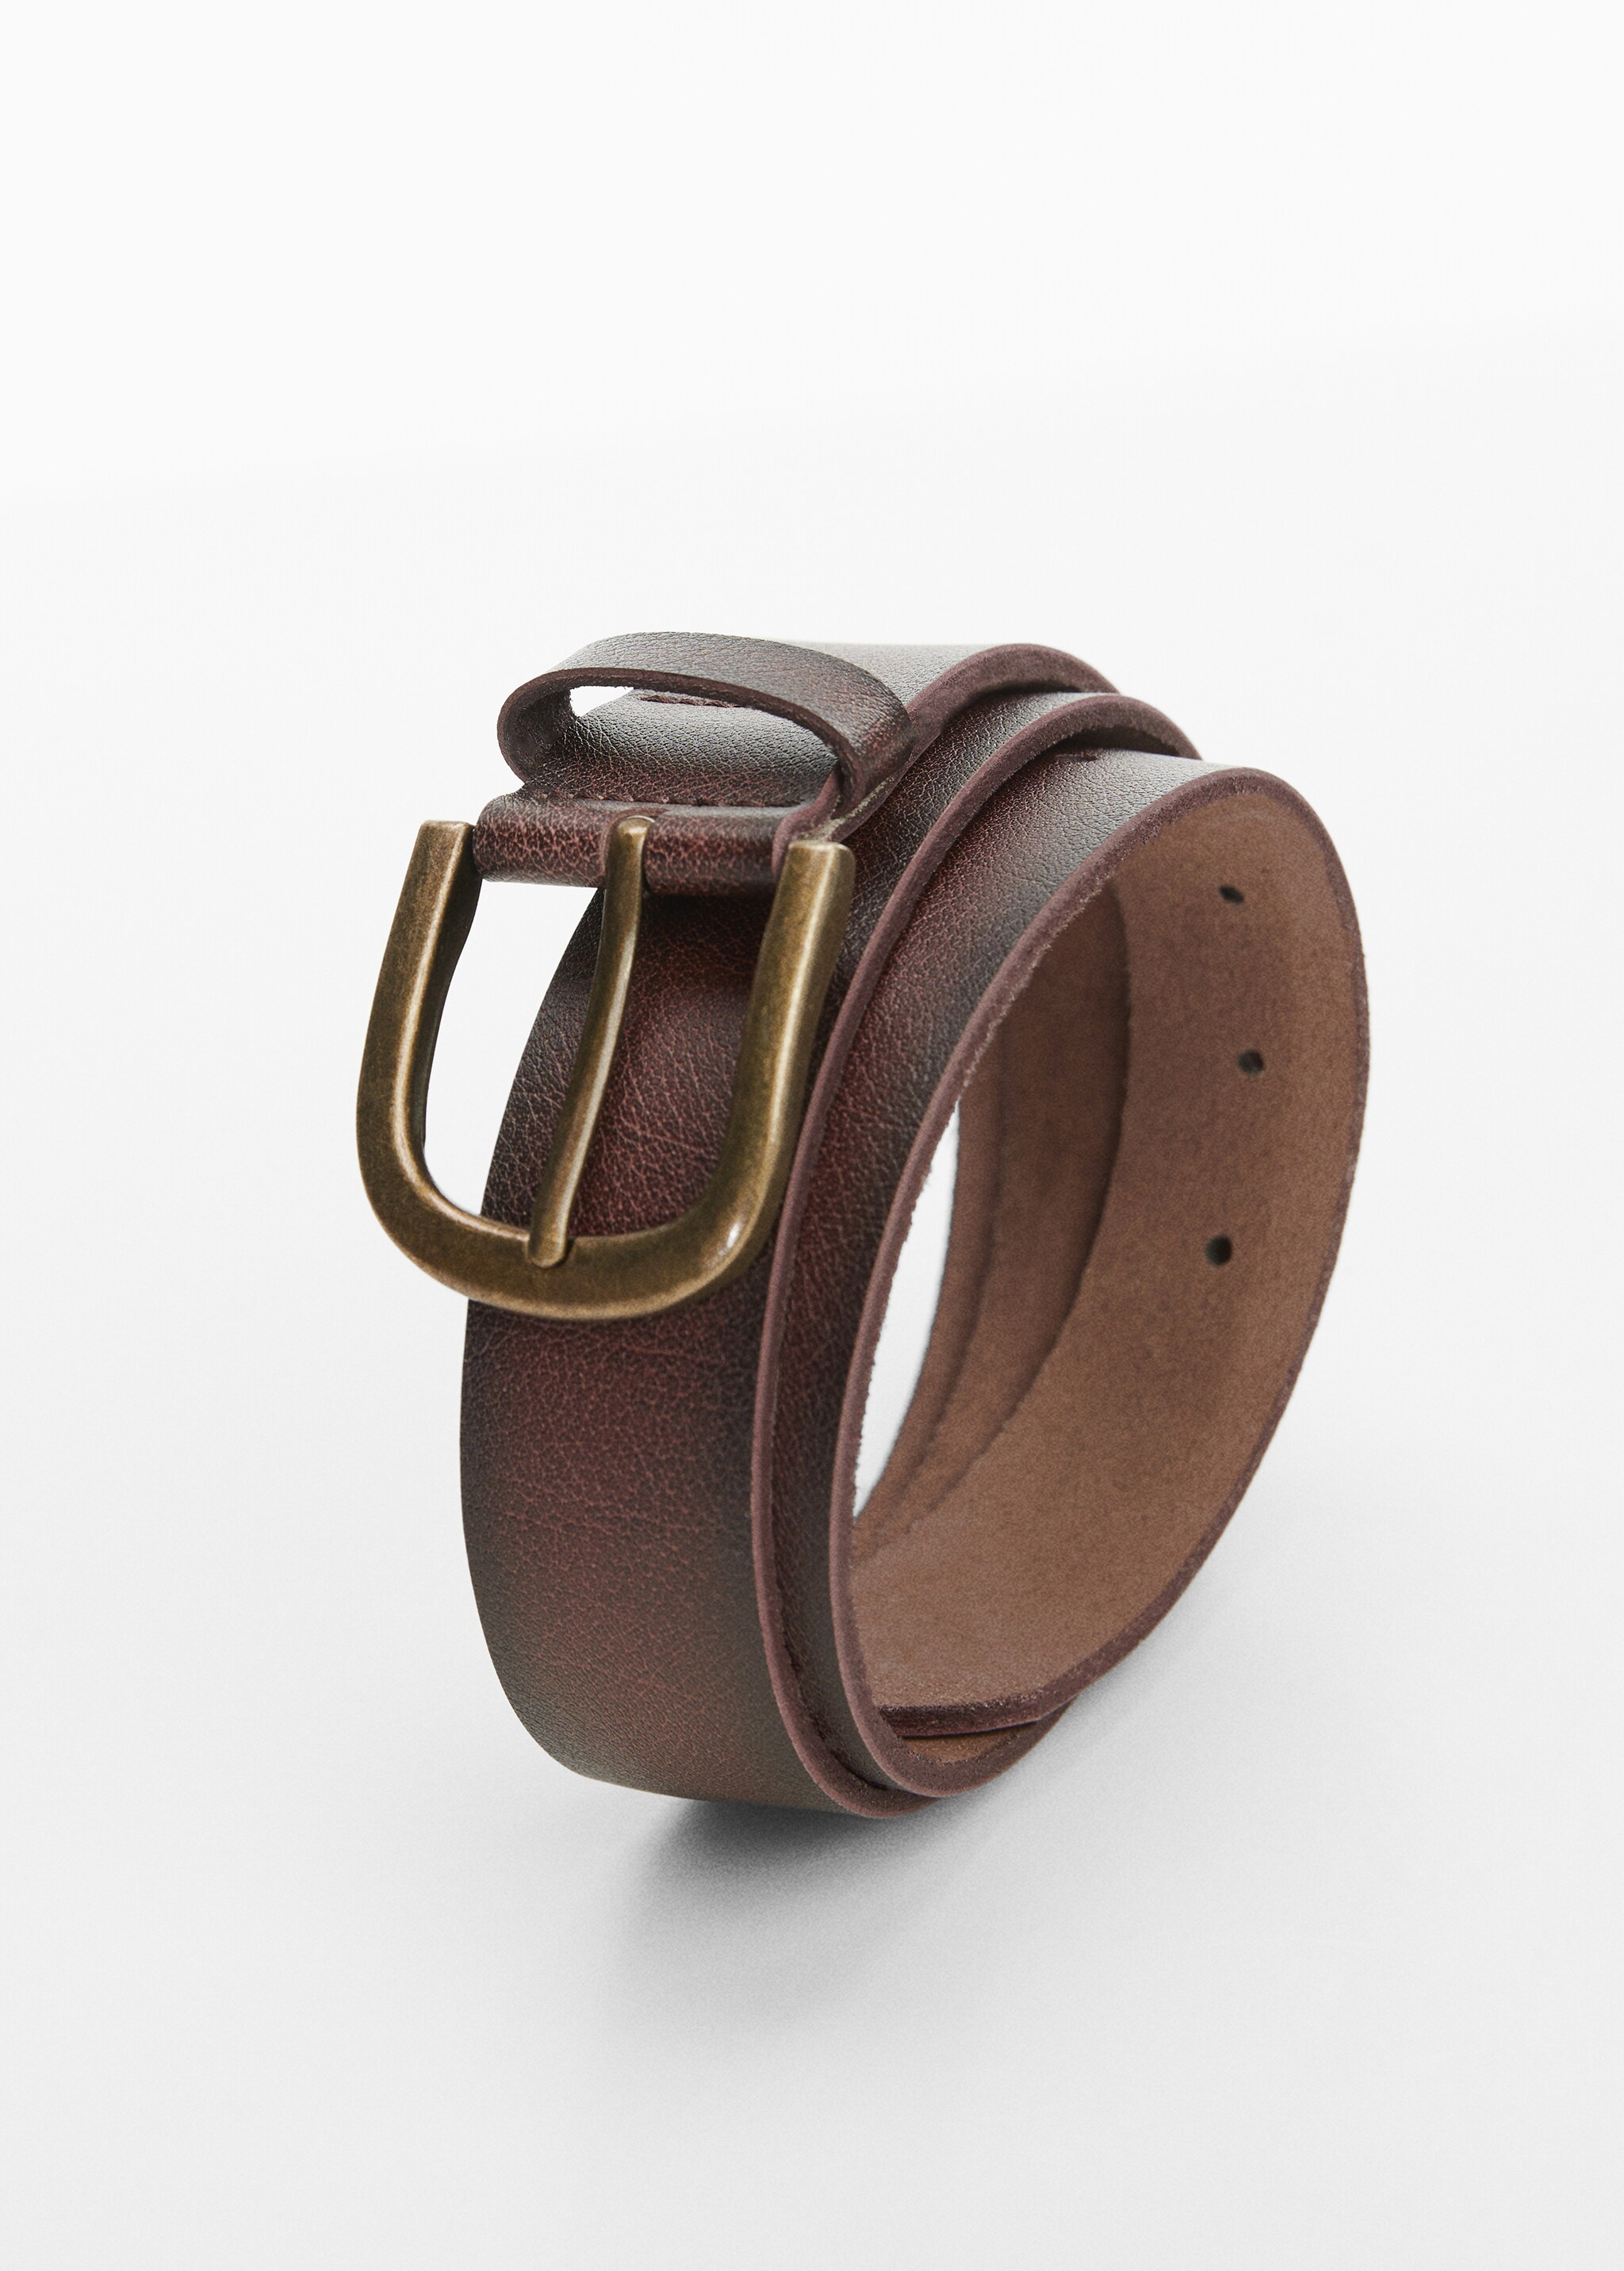 Pebbled leather belt - Details of the article 2